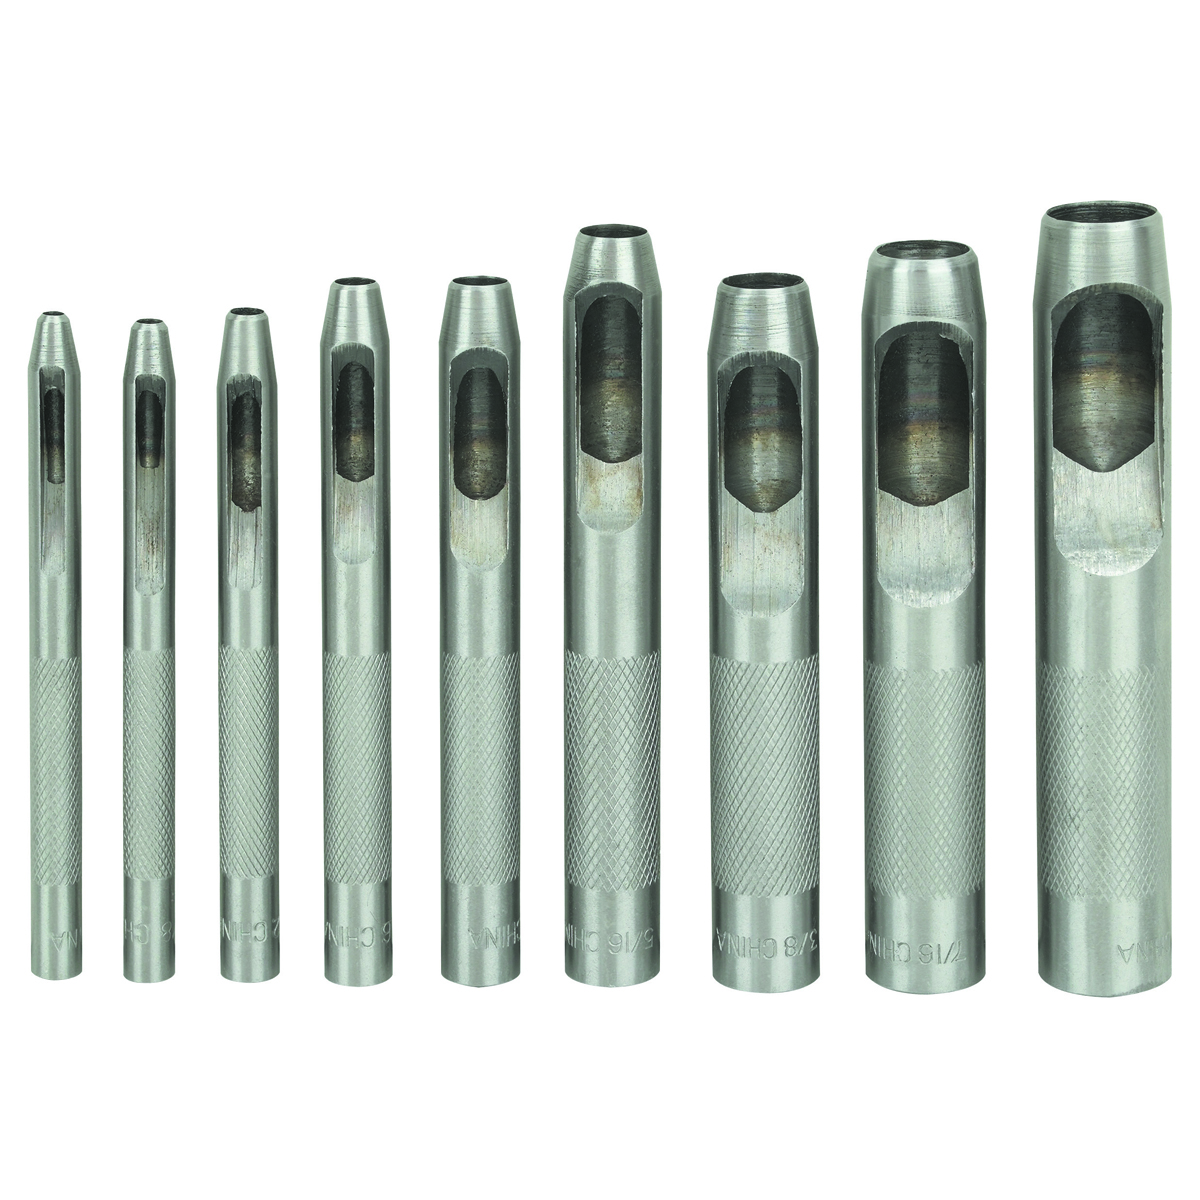 PITTSBURGH Hollow Punch Set 9 Pc. - Item 03838 / 56180